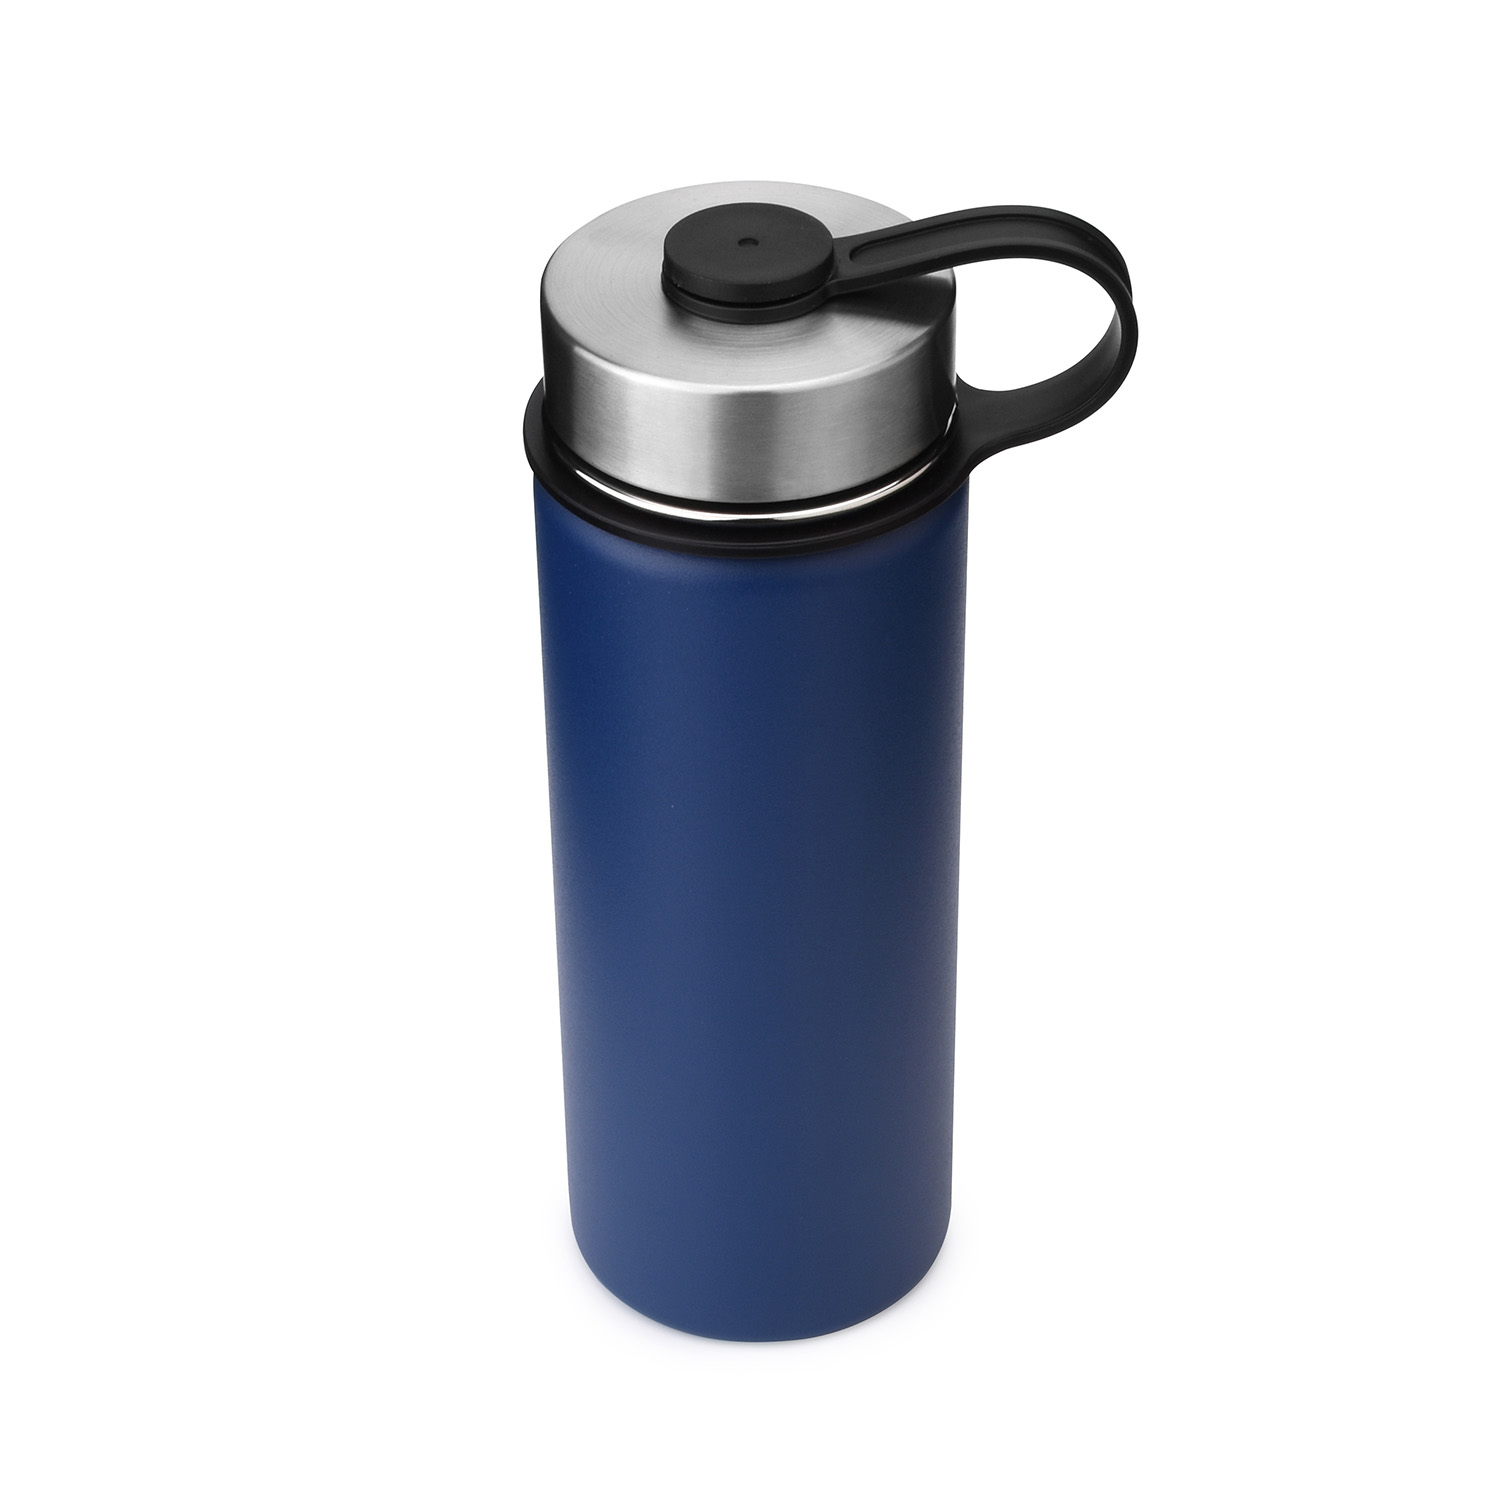 https://www.waterbottle.tech/wp-content/uploads/2018/10/insulated-durable-powder-coated-wide-mouth-water-bottle-18-oz-with-stainless-steel-cap-2.jpg